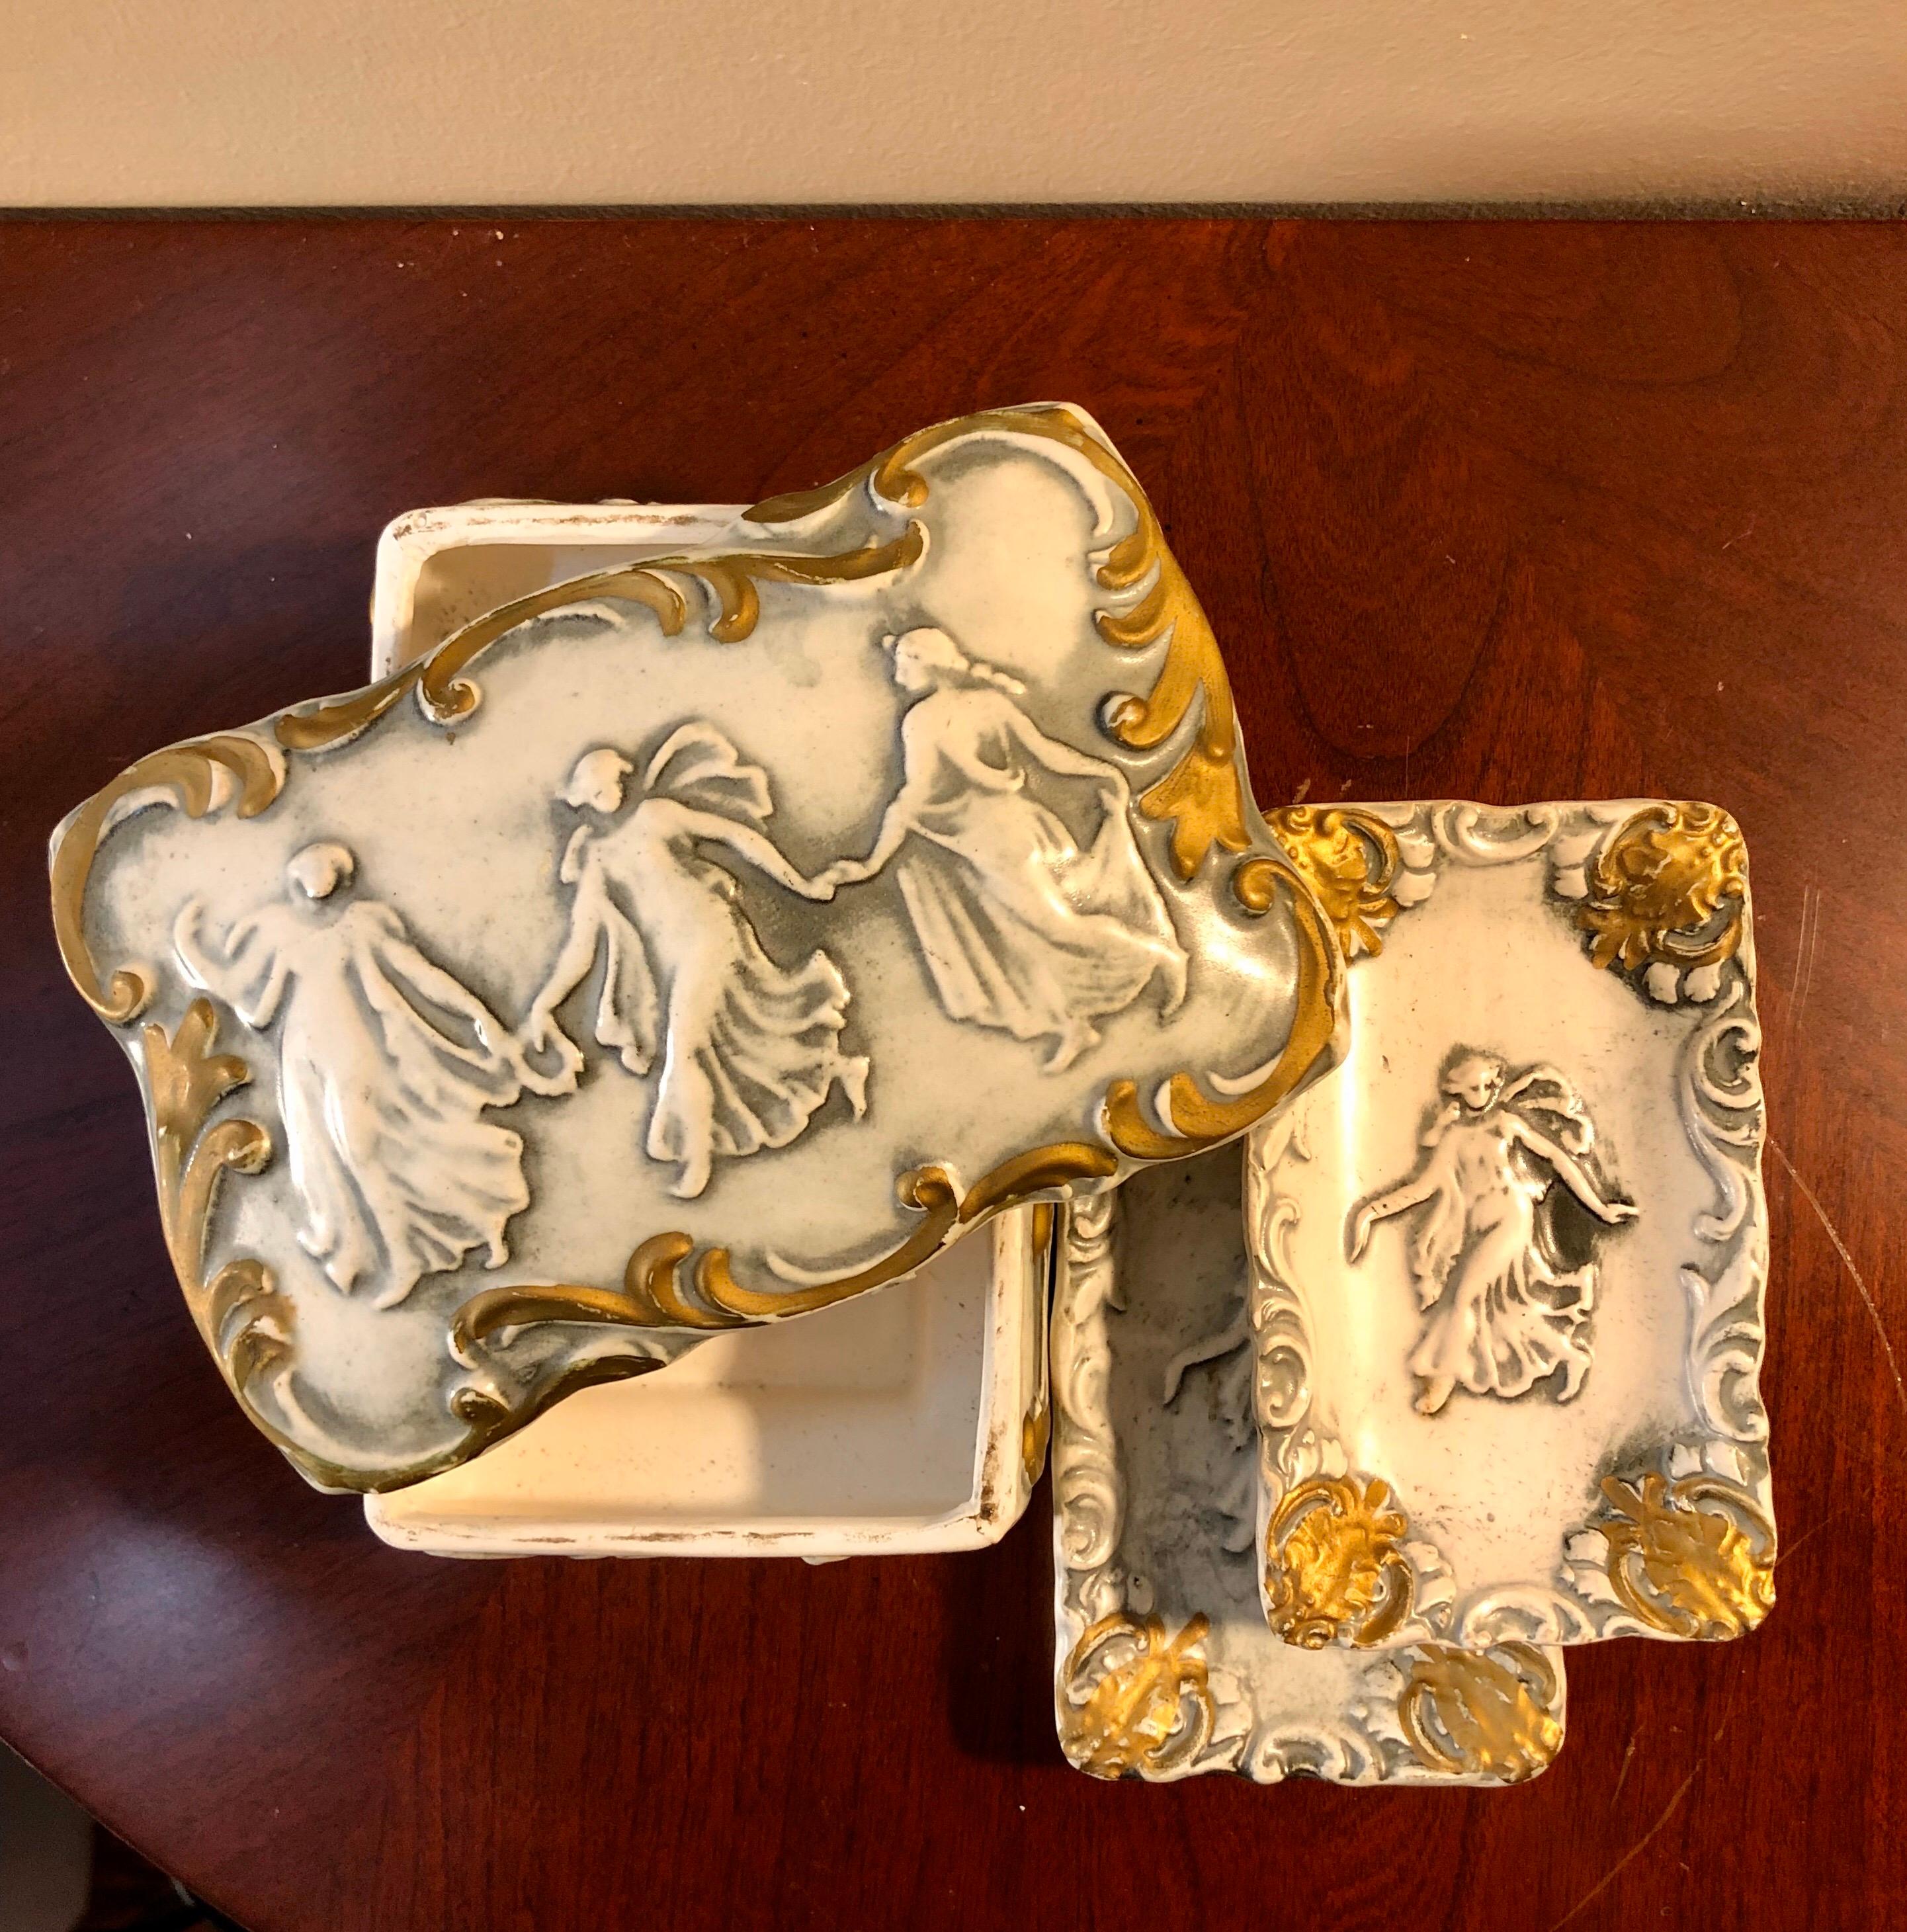 Late 1800s French Bisque Porcelain Gilt Trinket Box with Trays, Three Graces In Good Condition For Sale In Vineyard Haven, MA